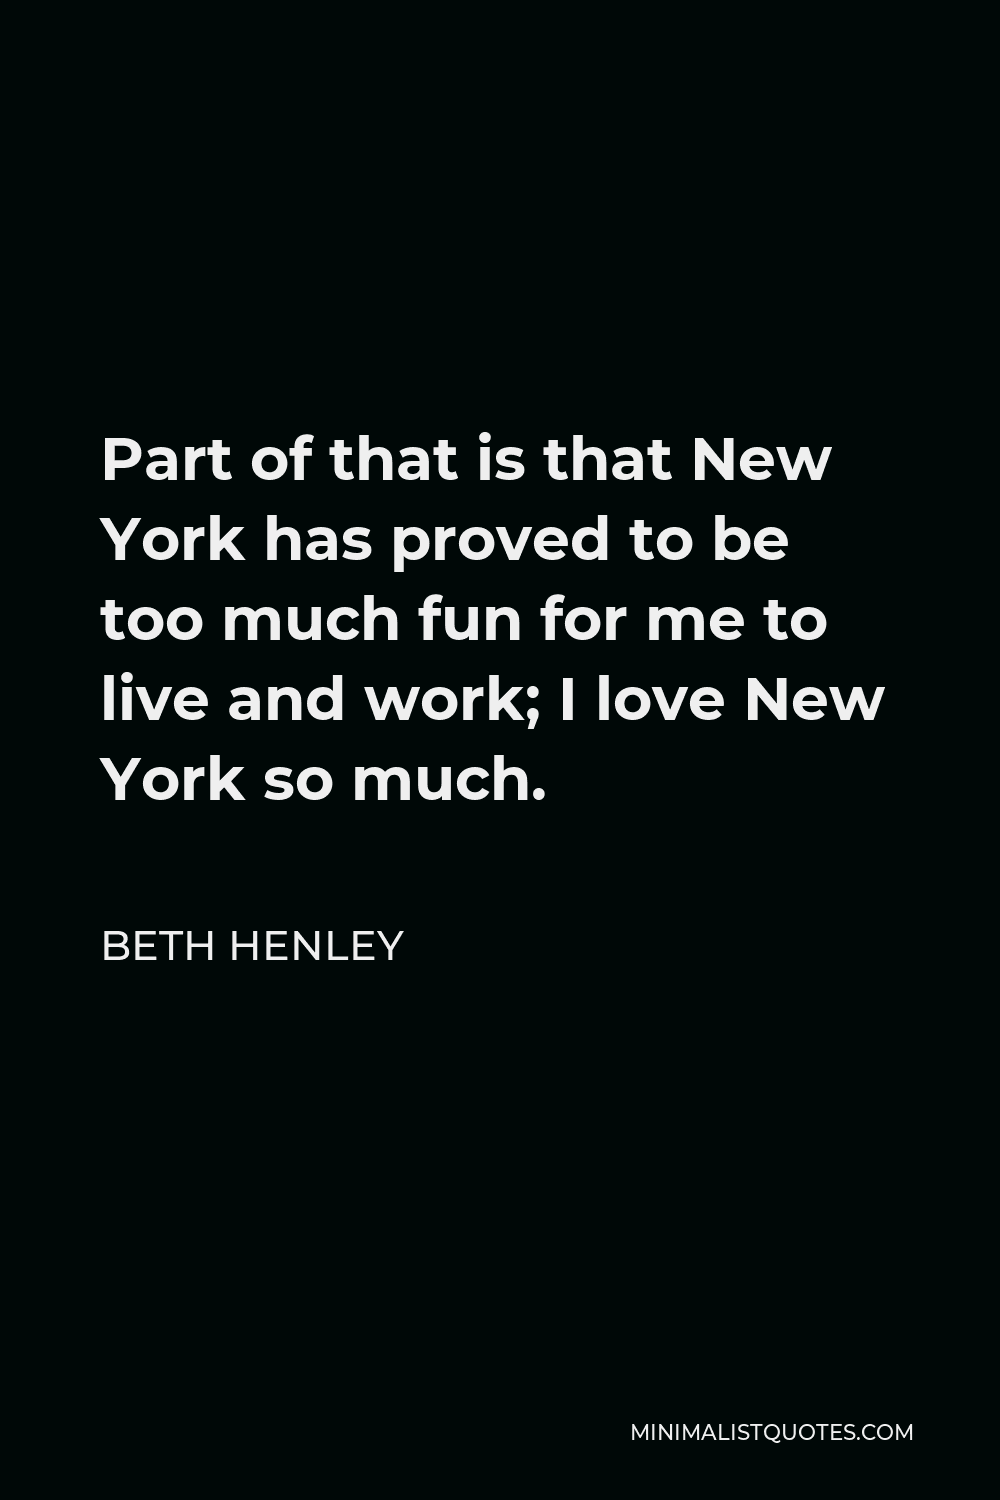 Beth Henley Quote - Part of that is that New York has proved to be too much fun for me to live and work; I love New York so much.